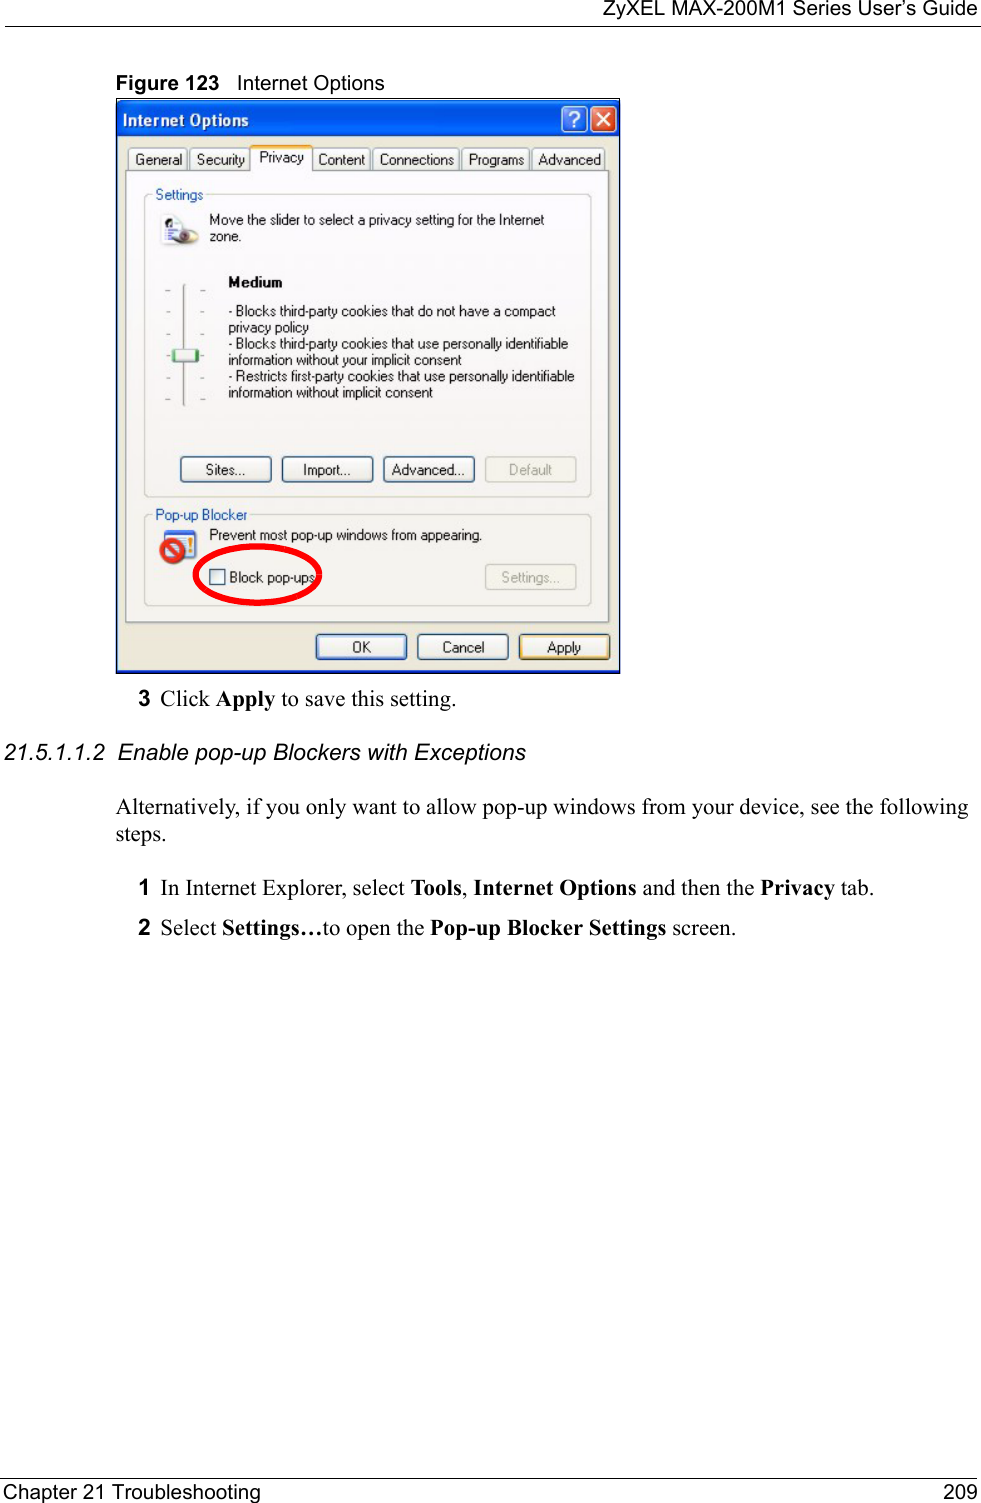 ZyXEL MAX-200M1 Series User’s GuideChapter 21 Troubleshooting 209Figure 123   Internet Options3Click Apply to save this setting.21.5.1.1.2  Enable pop-up Blockers with ExceptionsAlternatively, if you only want to allow pop-up windows from your device, see the following steps.1In Internet Explorer, select Tool s , Internet Options and then the Privacy tab. 2Select Settings…to open the Pop-up Blocker Settings screen.